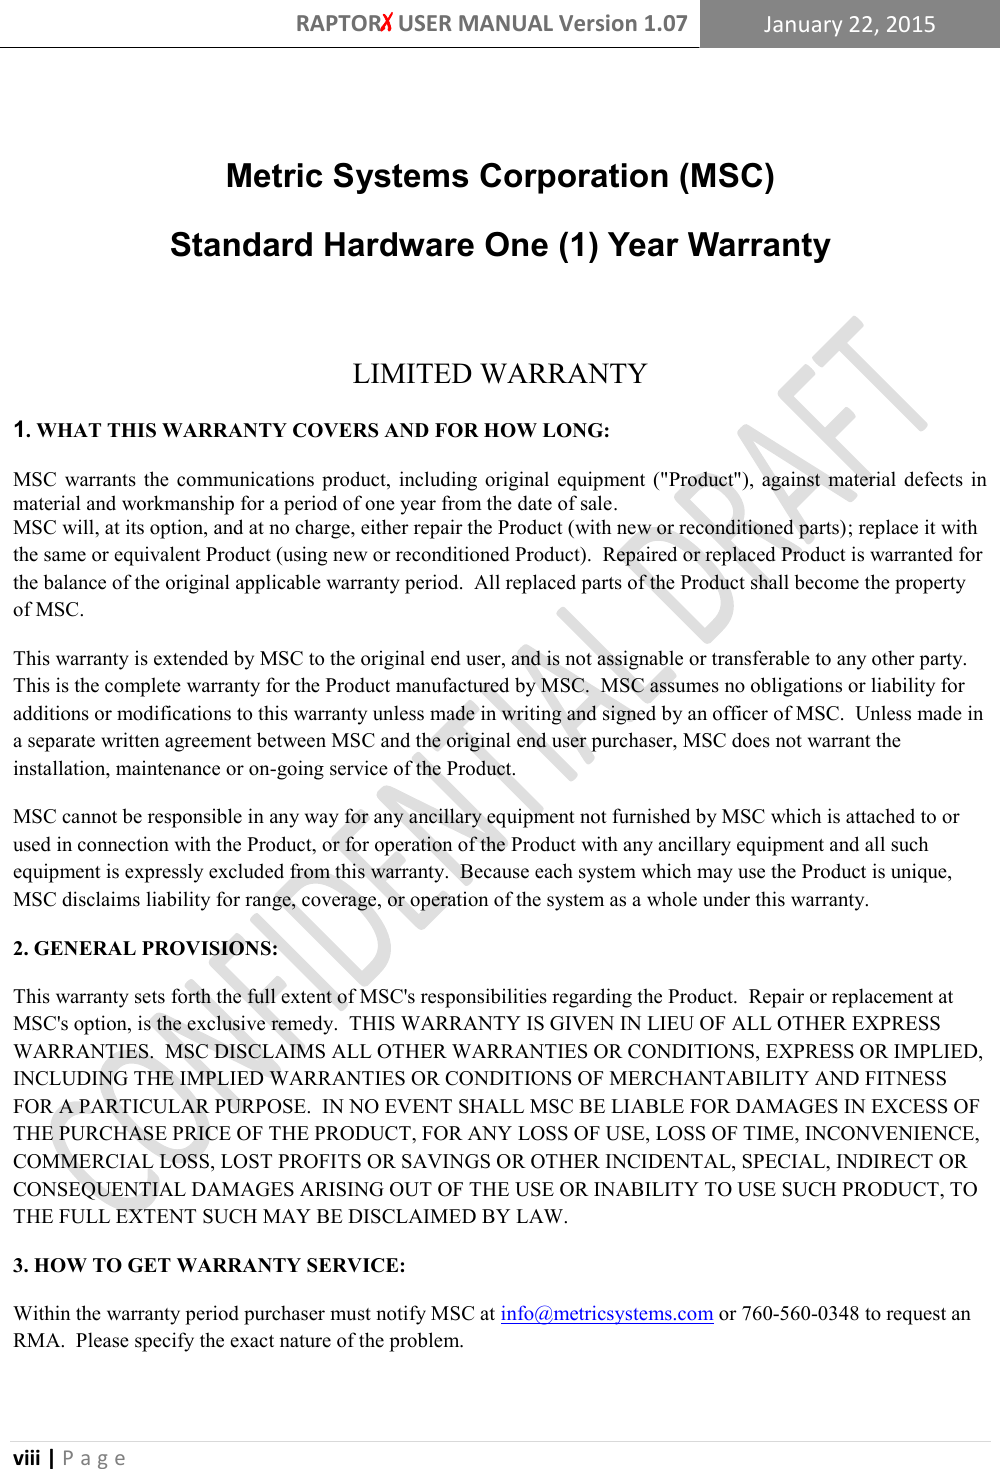 RAPTORX USER MANUAL Version 1.07 January 22, 2015  viii | P a g e    Metric Systems Corporation (MSC) Standard Hardware One (1) Year Warranty  LIMITED WARRANTY 1. WHAT THIS WARRANTY COVERS AND FOR HOW LONG: MSC  warrants  the communications  product,  including  original  equipment  (&quot;Product&quot;),  against  material  defects  in material and workmanship for a period of one year from the date of sale. MSC will, at its option, and at no charge, either repair the Product (with new or reconditioned parts); replace it with the same or equivalent Product (using new or reconditioned Product).  Repaired or replaced Product is warranted for the balance of the original applicable warranty period.  All replaced parts of the Product shall become the property of MSC. This warranty is extended by MSC to the original end user, and is not assignable or transferable to any other party.  This is the complete warranty for the Product manufactured by MSC.  MSC assumes no obligations or liability for additions or modifications to this warranty unless made in writing and signed by an officer of MSC.  Unless made in a separate written agreement between MSC and the original end user purchaser, MSC does not warrant the installation, maintenance or on-going service of the Product. MSC cannot be responsible in any way for any ancillary equipment not furnished by MSC which is attached to or used in connection with the Product, or for operation of the Product with any ancillary equipment and all such equipment is expressly excluded from this warranty.  Because each system which may use the Product is unique, MSC disclaims liability for range, coverage, or operation of the system as a whole under this warranty. 2. GENERAL PROVISIONS: This warranty sets forth the full extent of MSC&apos;s responsibilities regarding the Product.  Repair or replacement at MSC&apos;s option, is the exclusive remedy.  THIS WARRANTY IS GIVEN IN LIEU OF ALL OTHER EXPRESS WARRANTIES.  MSC DISCLAIMS ALL OTHER WARRANTIES OR CONDITIONS, EXPRESS OR IMPLIED, INCLUDING THE IMPLIED WARRANTIES OR CONDITIONS OF MERCHANTABILITY AND FITNESS FOR A PARTICULAR PURPOSE.  IN NO EVENT SHALL MSC BE LIABLE FOR DAMAGES IN EXCESS OF THE PURCHASE PRICE OF THE PRODUCT, FOR ANY LOSS OF USE, LOSS OF TIME, INCONVENIENCE, COMMERCIAL LOSS, LOST PROFITS OR SAVINGS OR OTHER INCIDENTAL, SPECIAL, INDIRECT OR CONSEQUENTIAL DAMAGES ARISING OUT OF THE USE OR INABILITY TO USE SUCH PRODUCT, TO THE FULL EXTENT SUCH MAY BE DISCLAIMED BY LAW. 3. HOW TO GET WARRANTY SERVICE: Within the warranty period purchaser must notify MSC at info@metricsystems.com or 760-560-0348 to request an RMA.  Please specify the exact nature of the problem.  